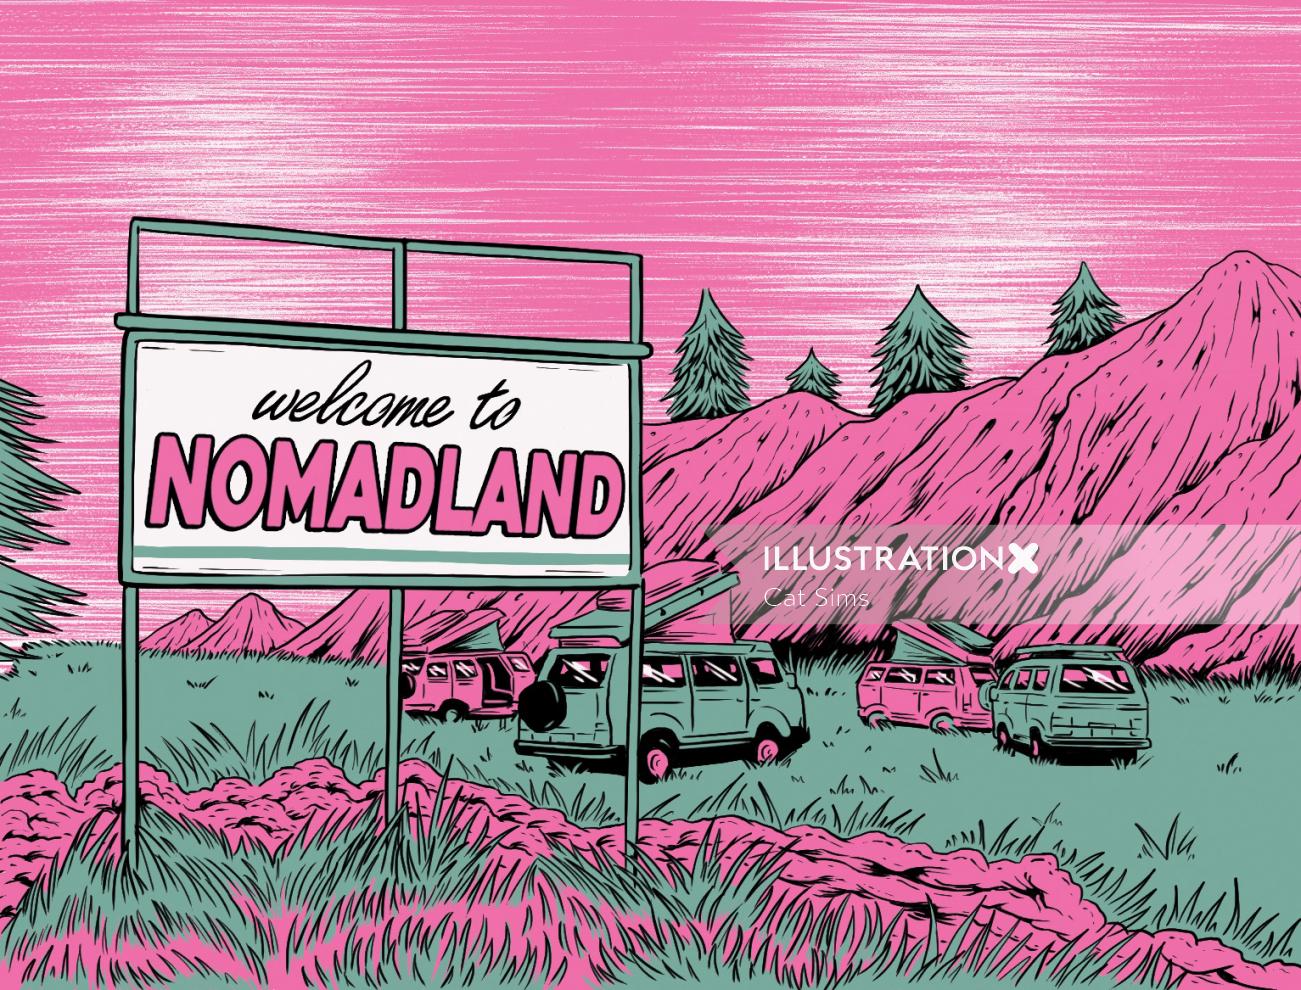 Graphic welcome to nomadland
